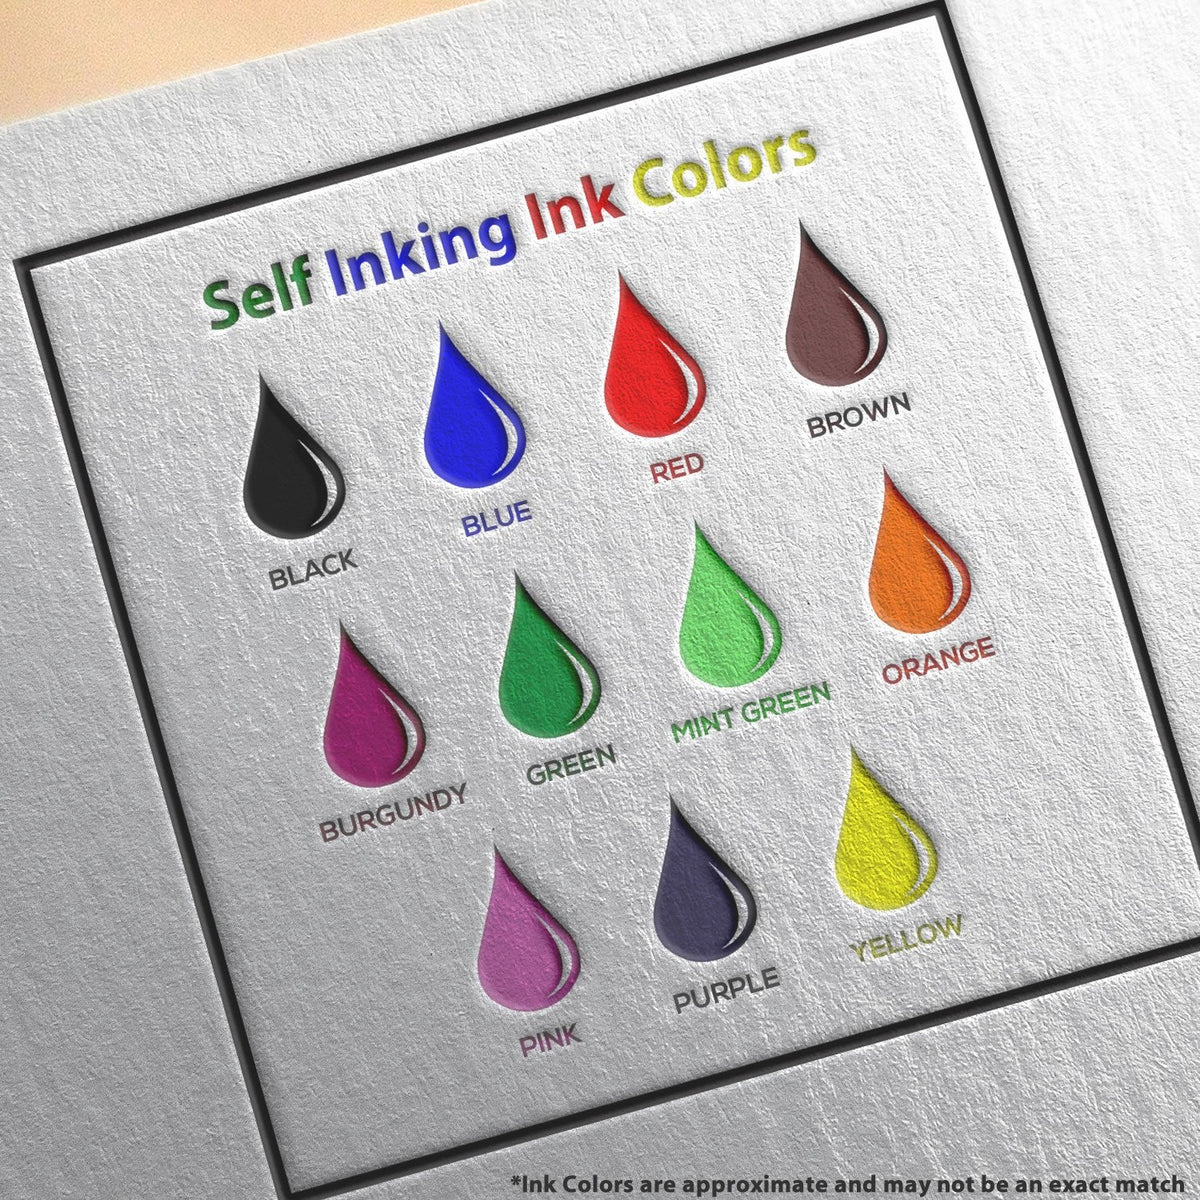 Self-Inking Round Posted Stamp Ink Color Options